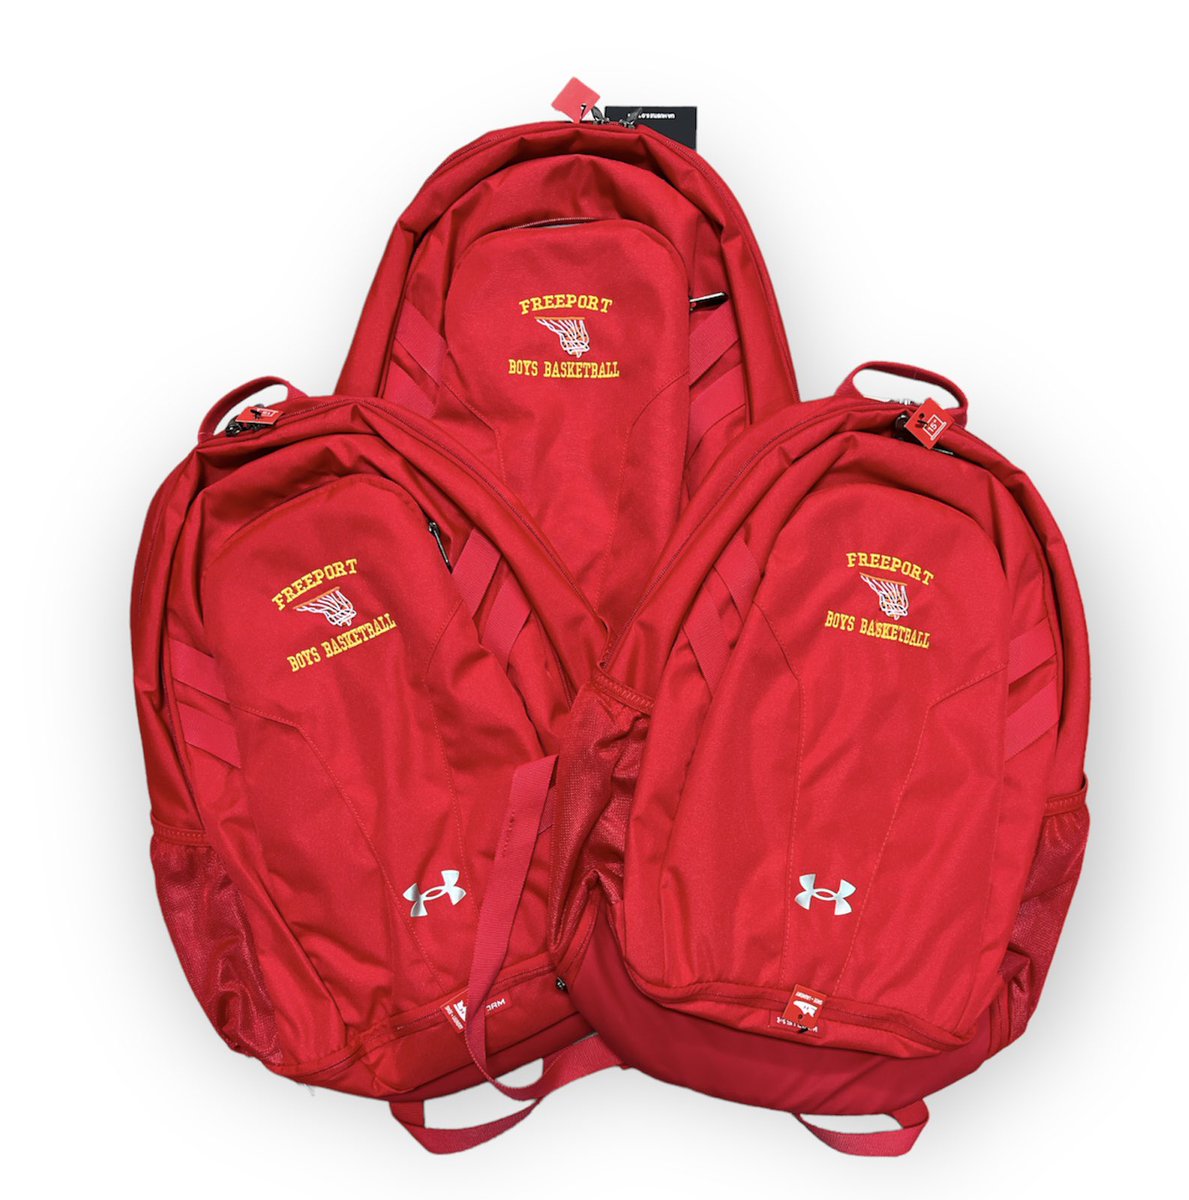 Customize the way you carry your gear. #embroideredbags #custombags